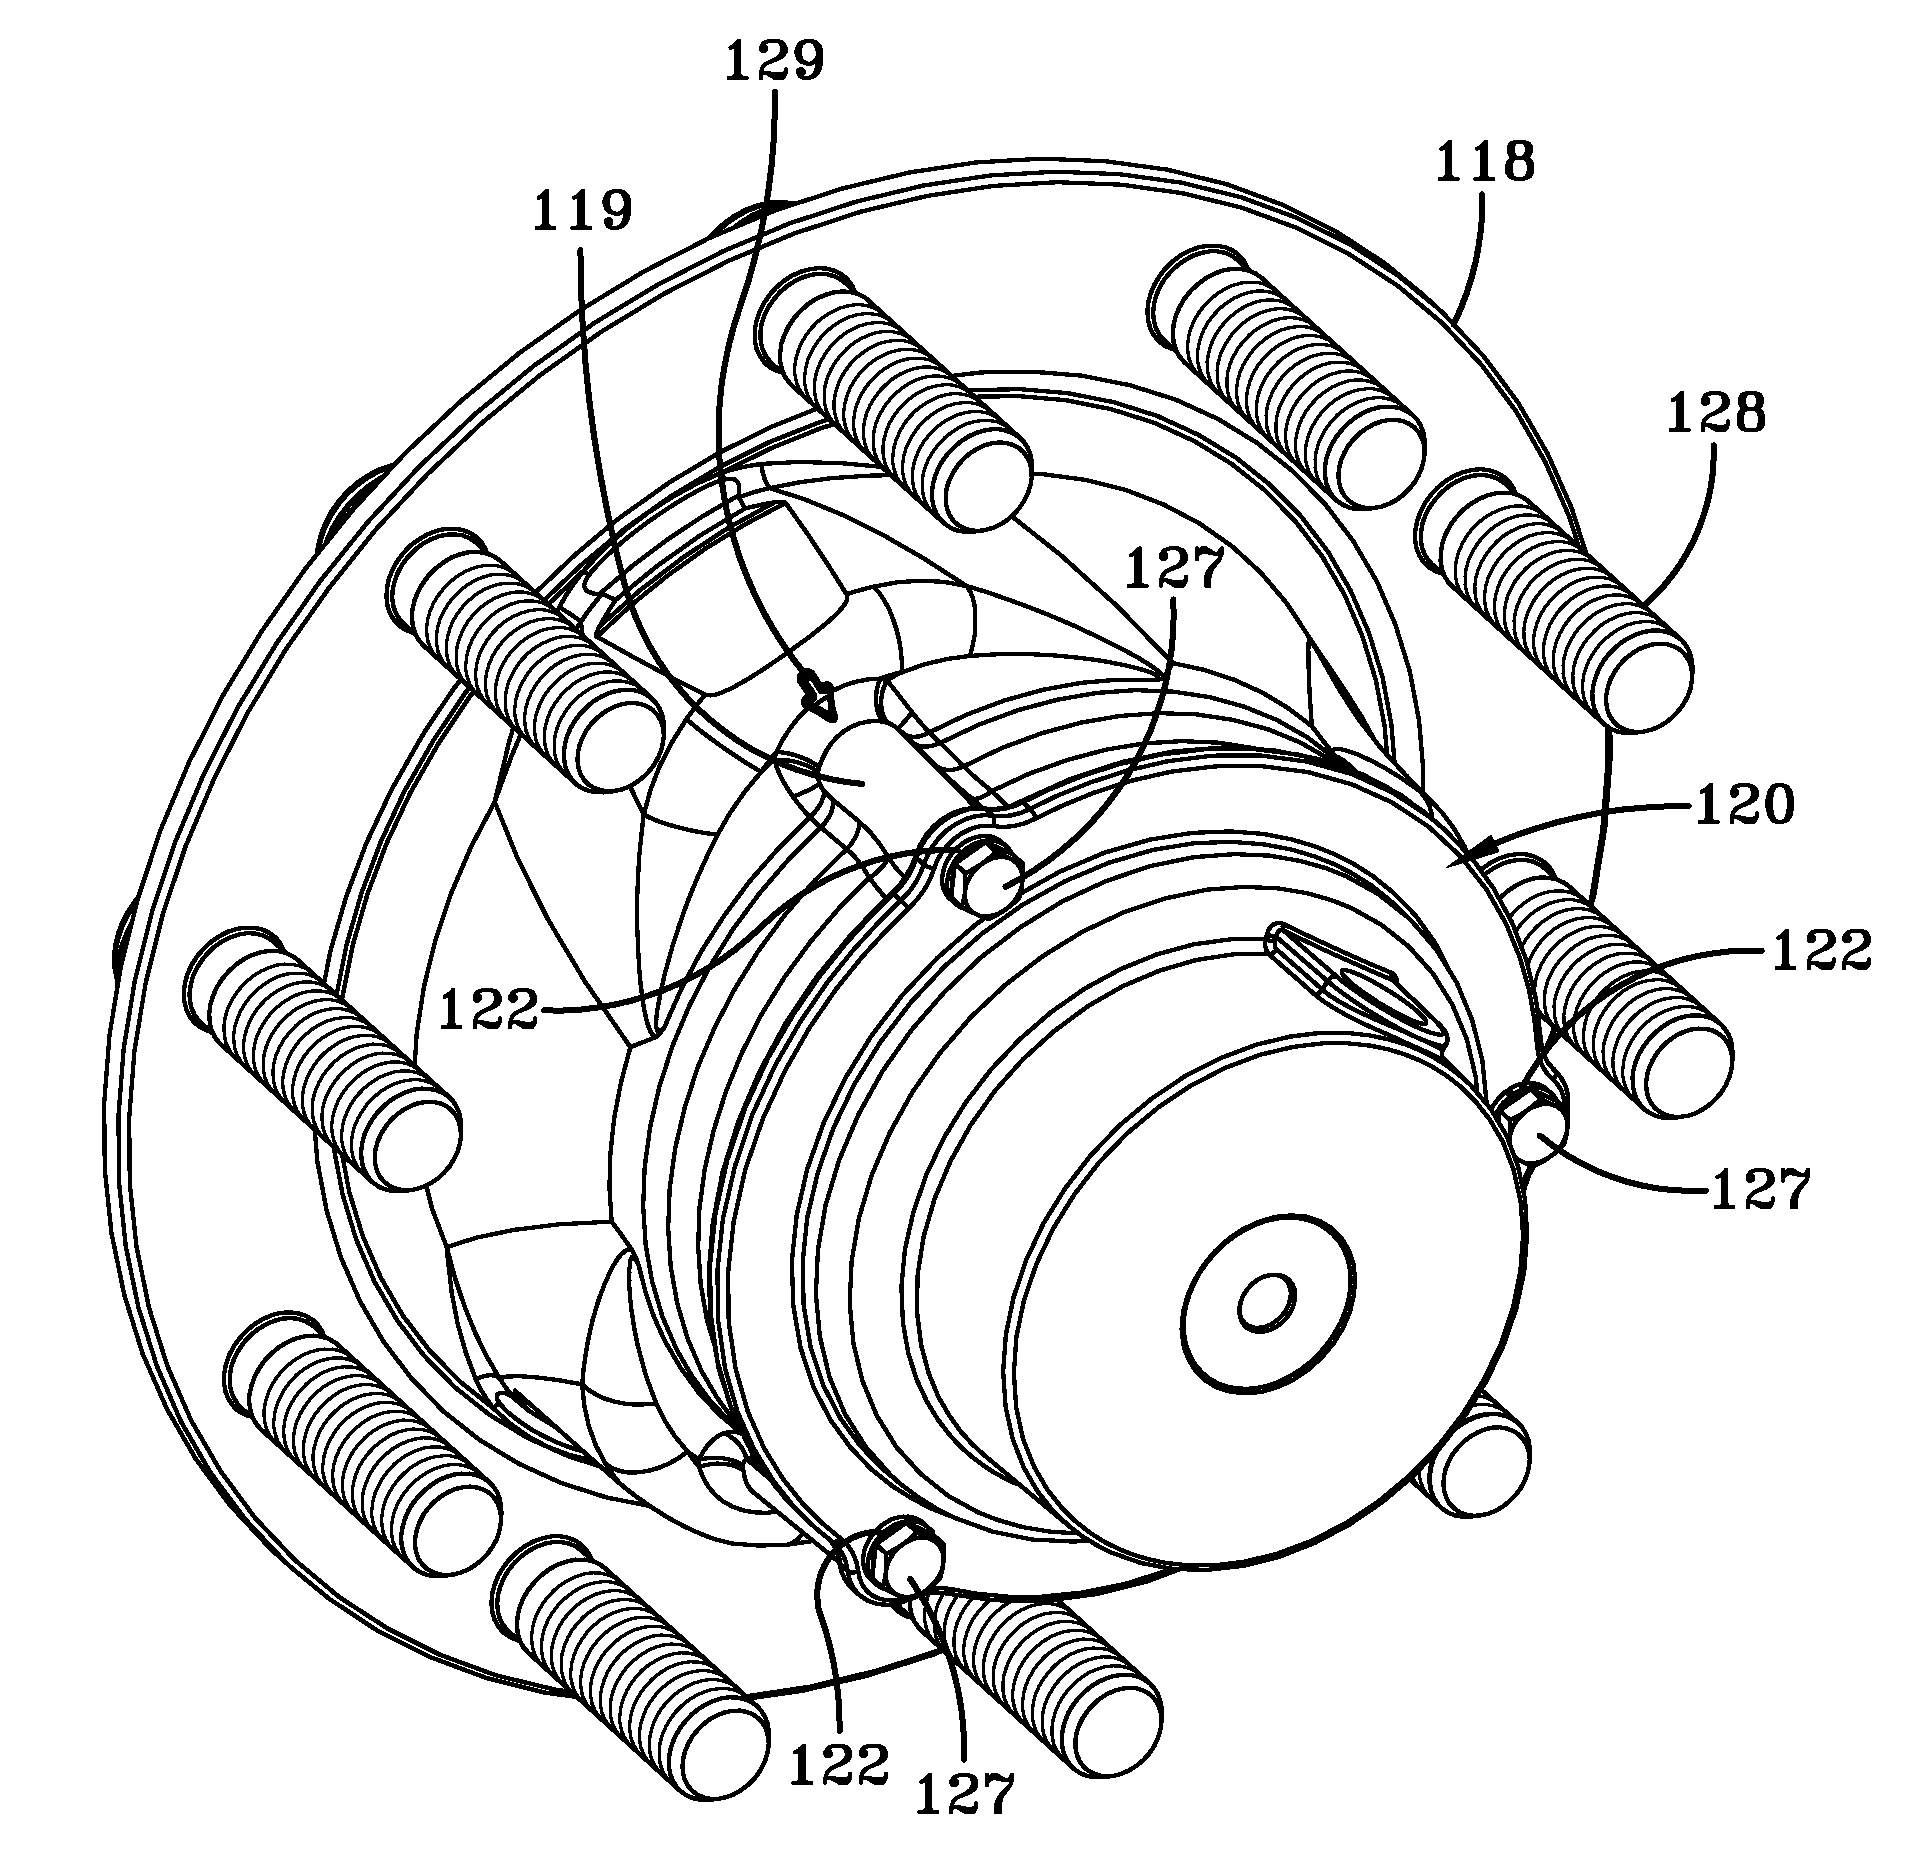 Wheel hub with lubricant fill port